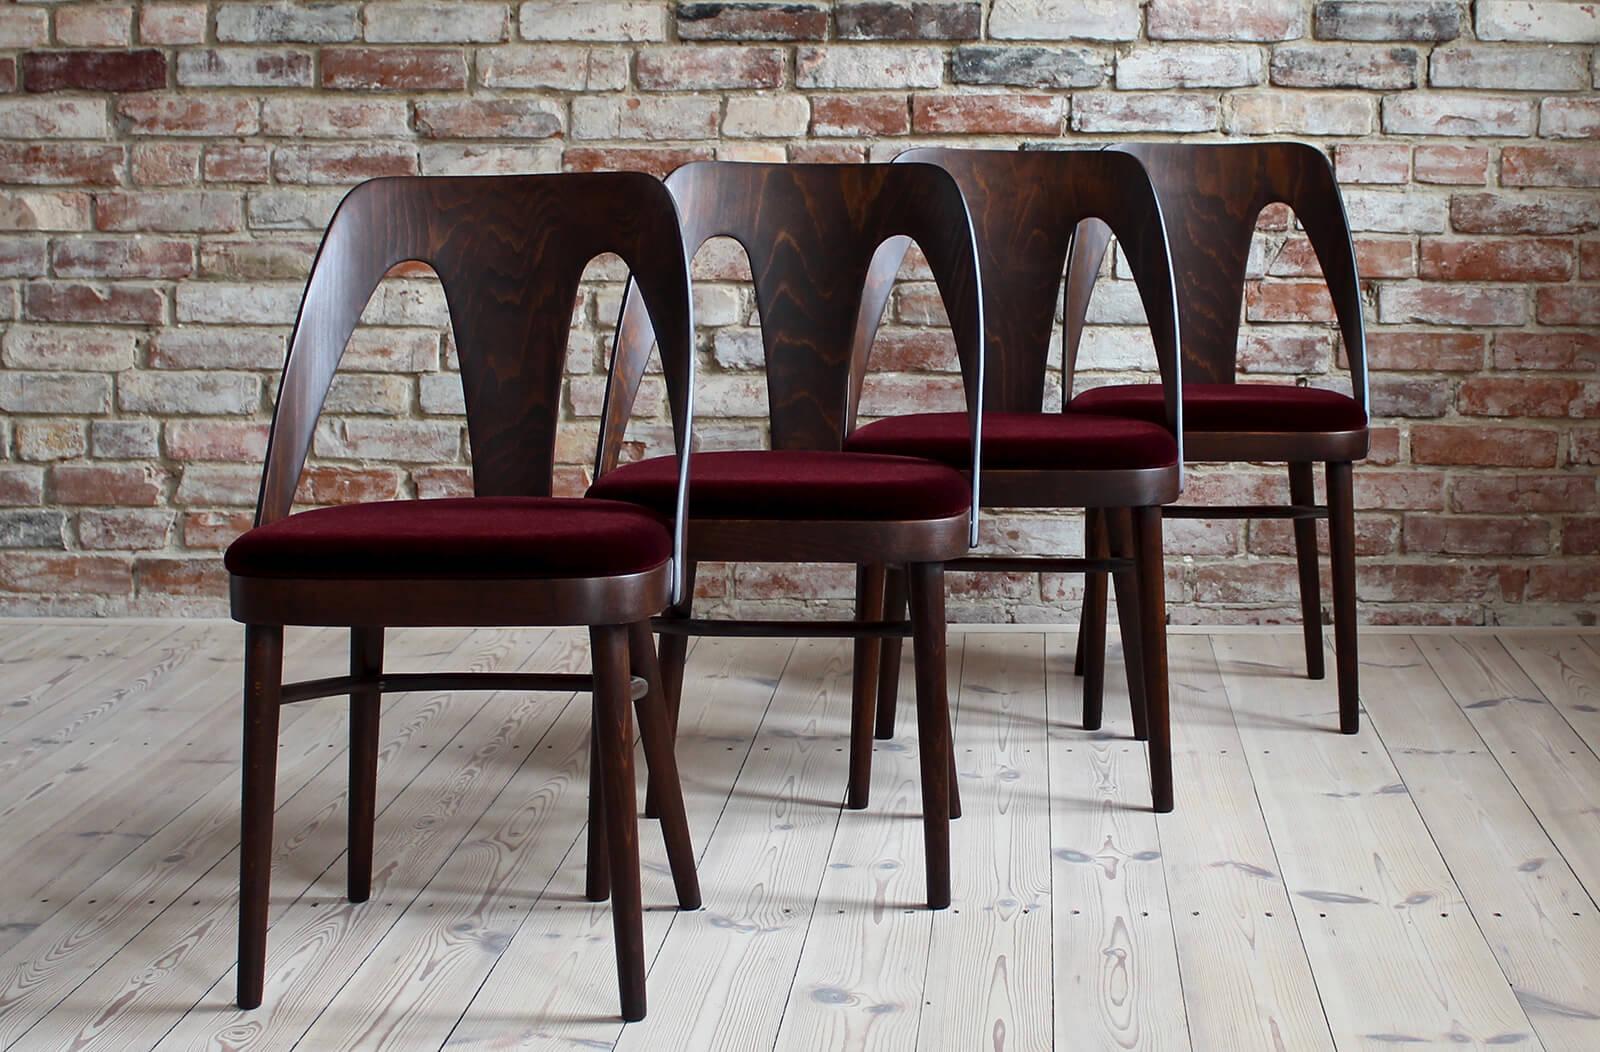 These chairs were produced in the 1950s in a well-known bentwood furniture factory in Radomsko, Poland. Out of the many models that were made in Fameg back in those days, the A6070 chairs stand out with a stabile construction and their extremely